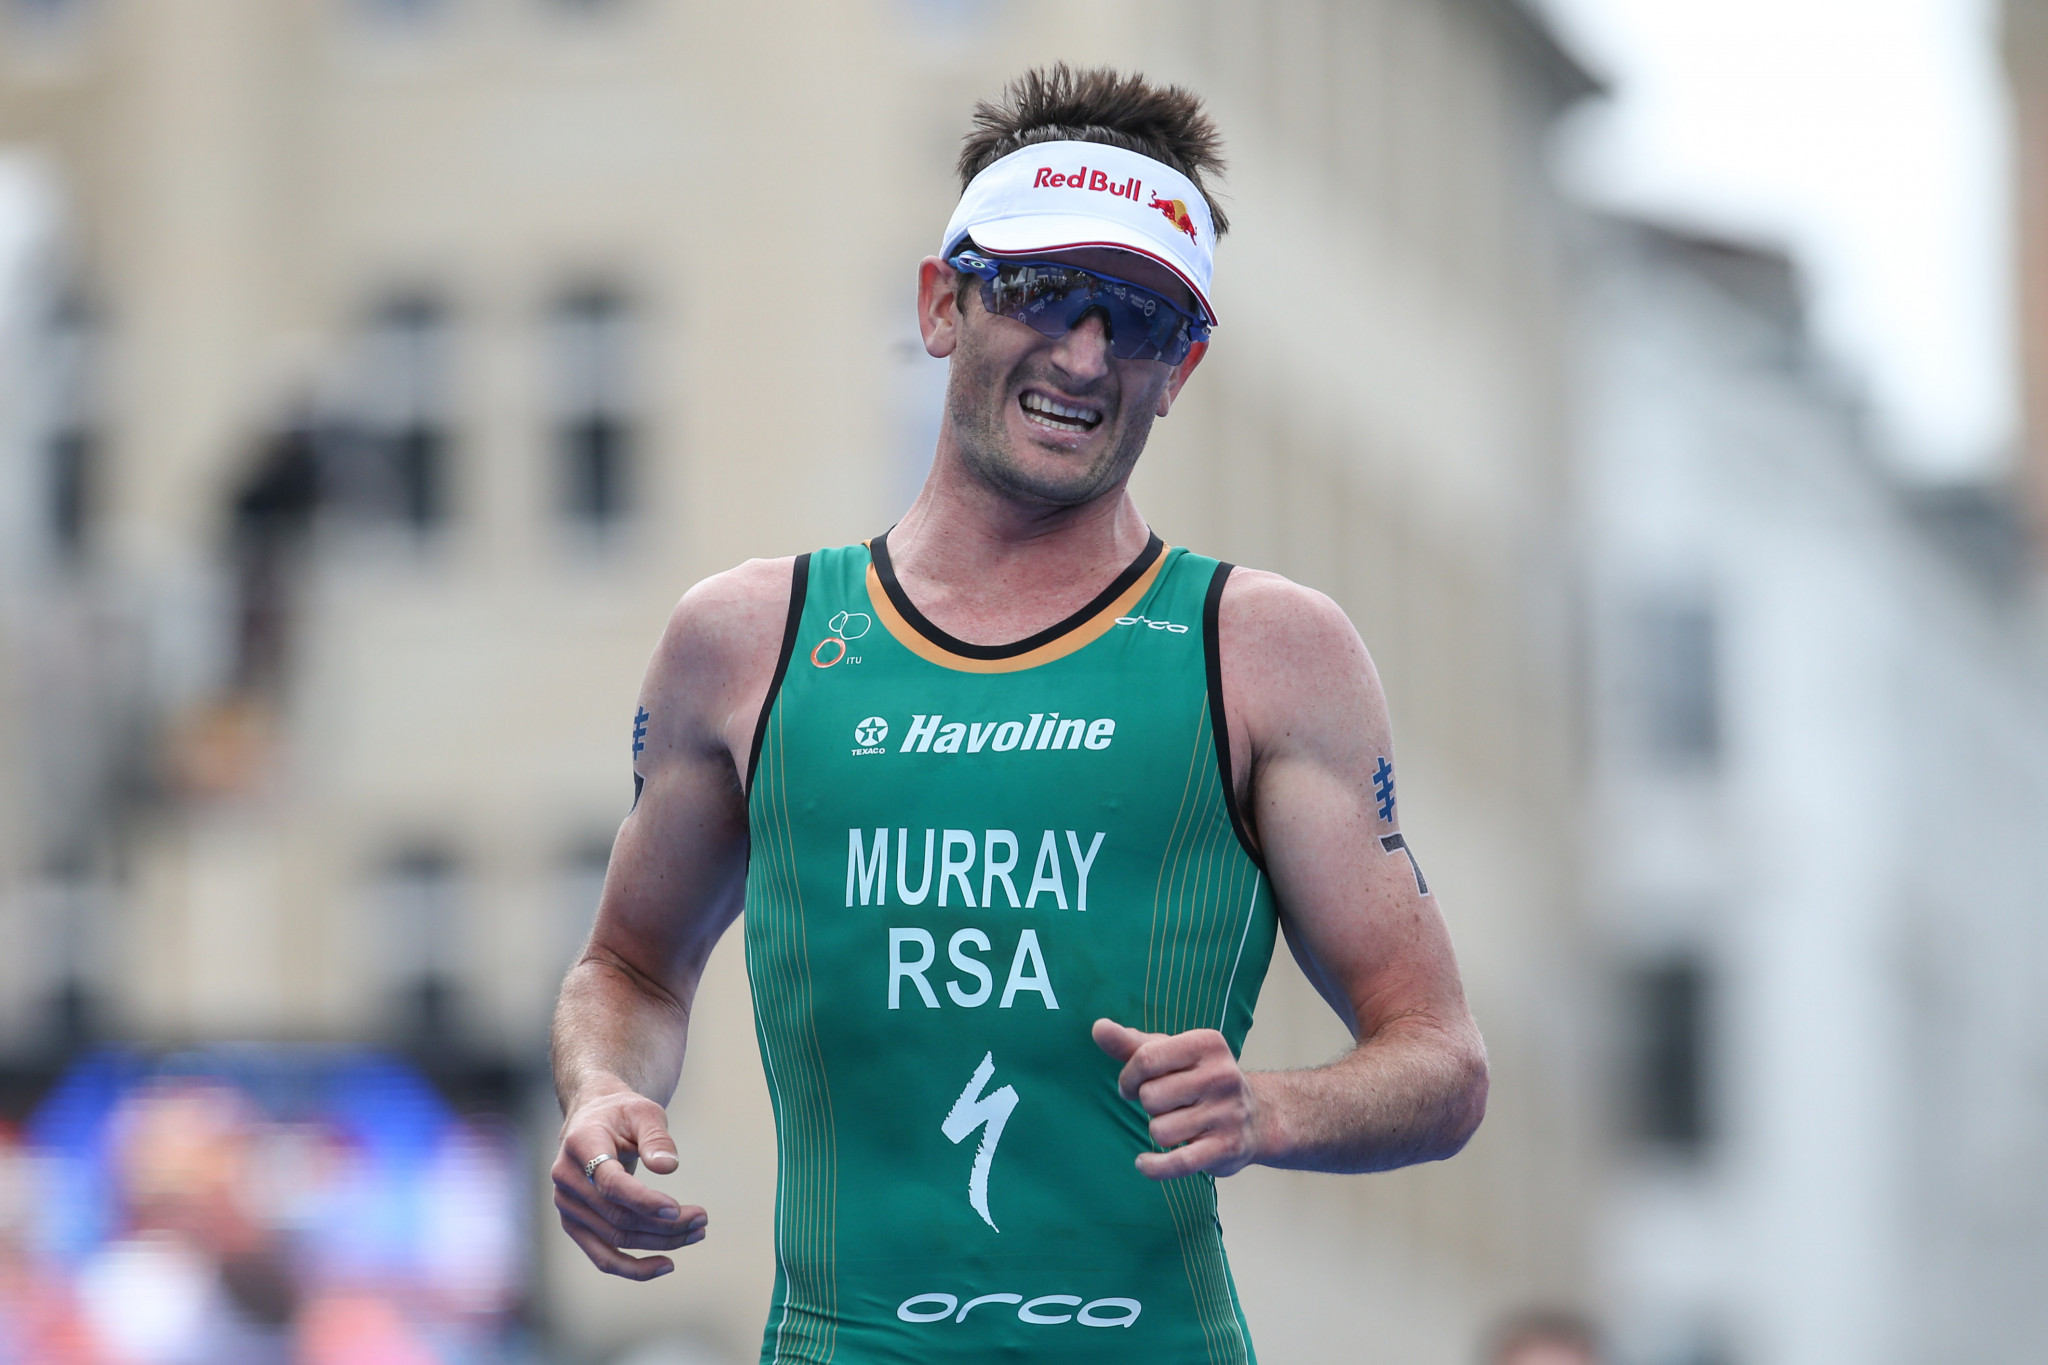 Richard Murray won the men's duathlon world title in 2016 when they were last staged in Aviles ©Getty Images